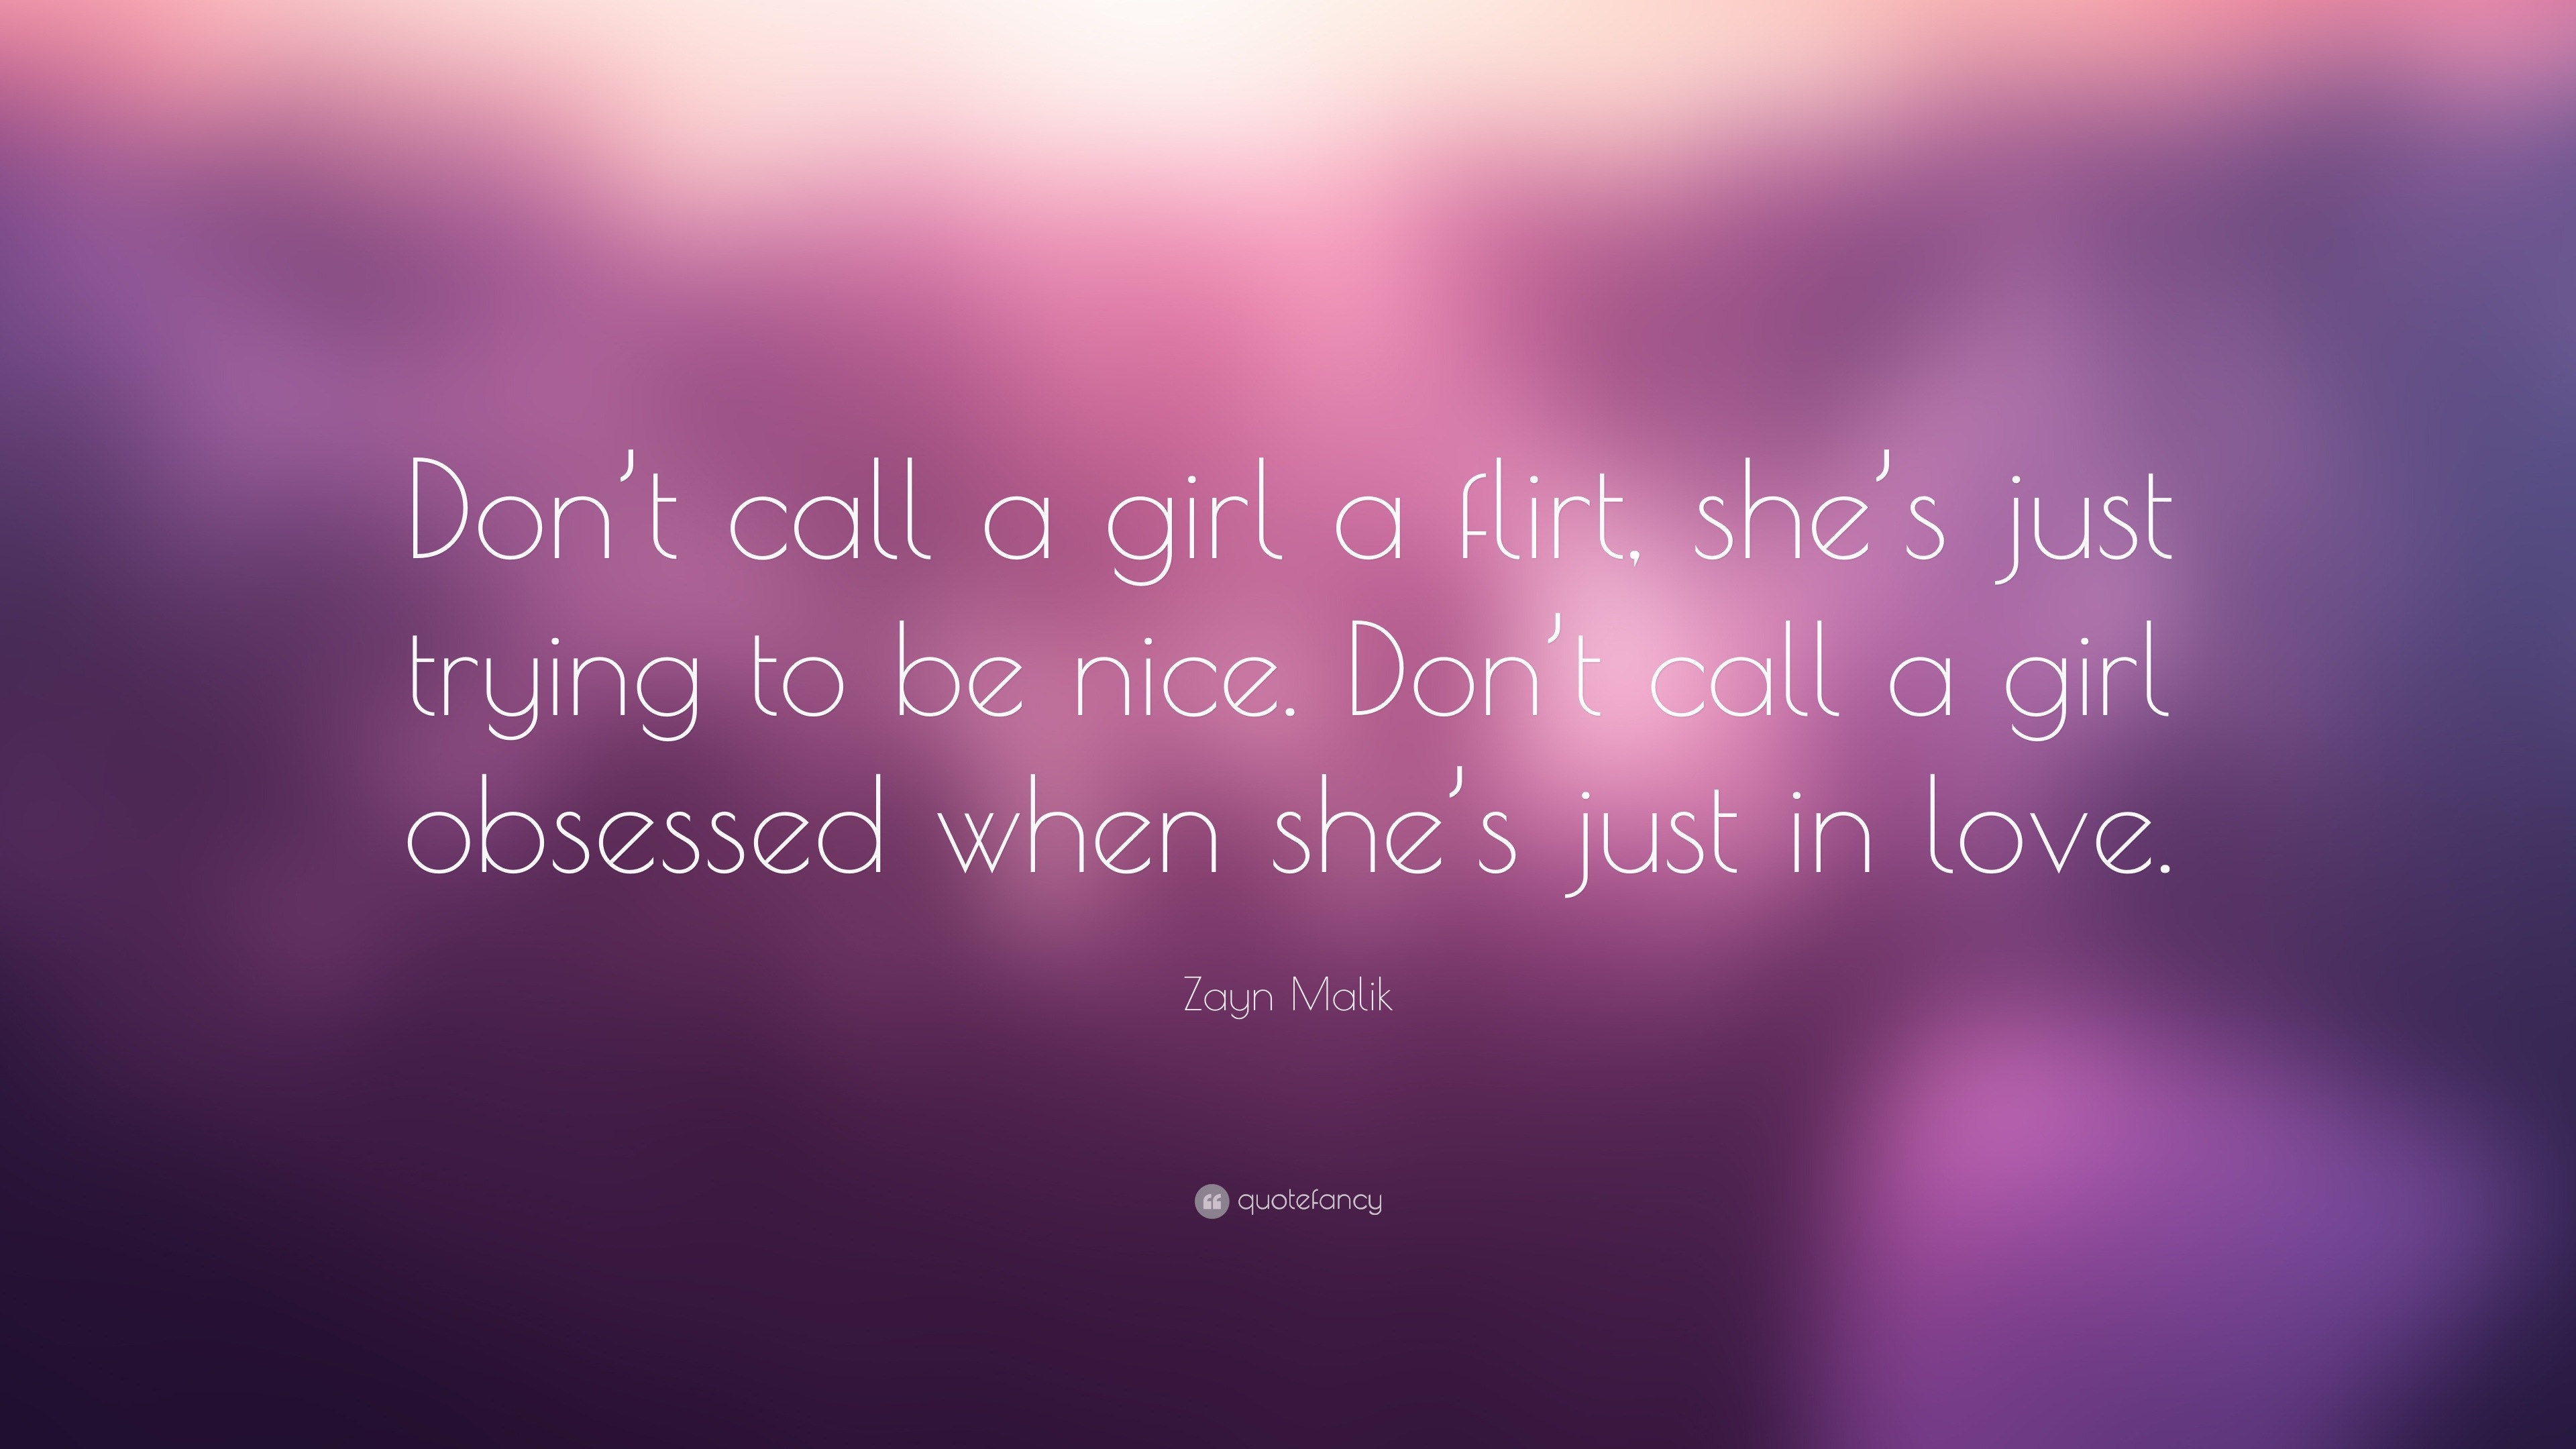 flirting quotes to girls without love: